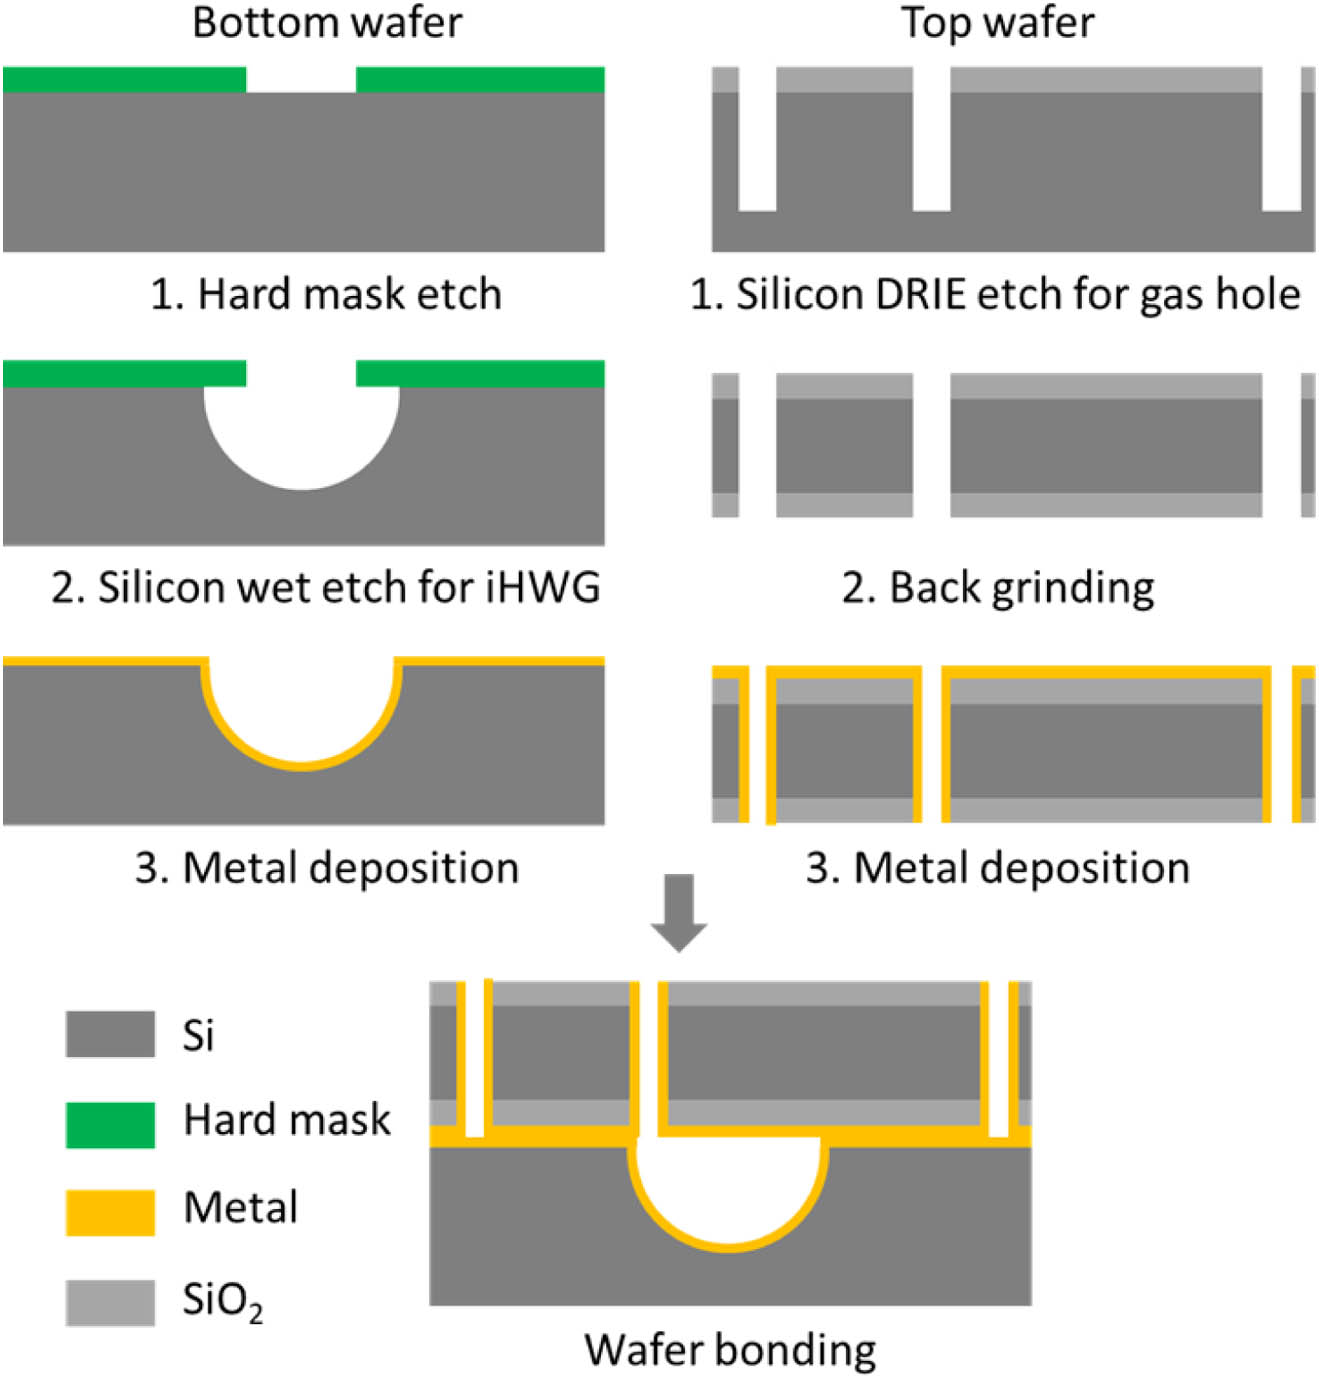 Fabrication process of Si-iHWG with a semicircular cross section. Drawing is not to scale. Two silicon wafers are used, one as the bottom wafer for Si-iHWG formation and the other as the top covering wafer to form the top part of the Si-iHWG. The top wafer and the bottom wafer are bonded together to form the Si-iHWG.